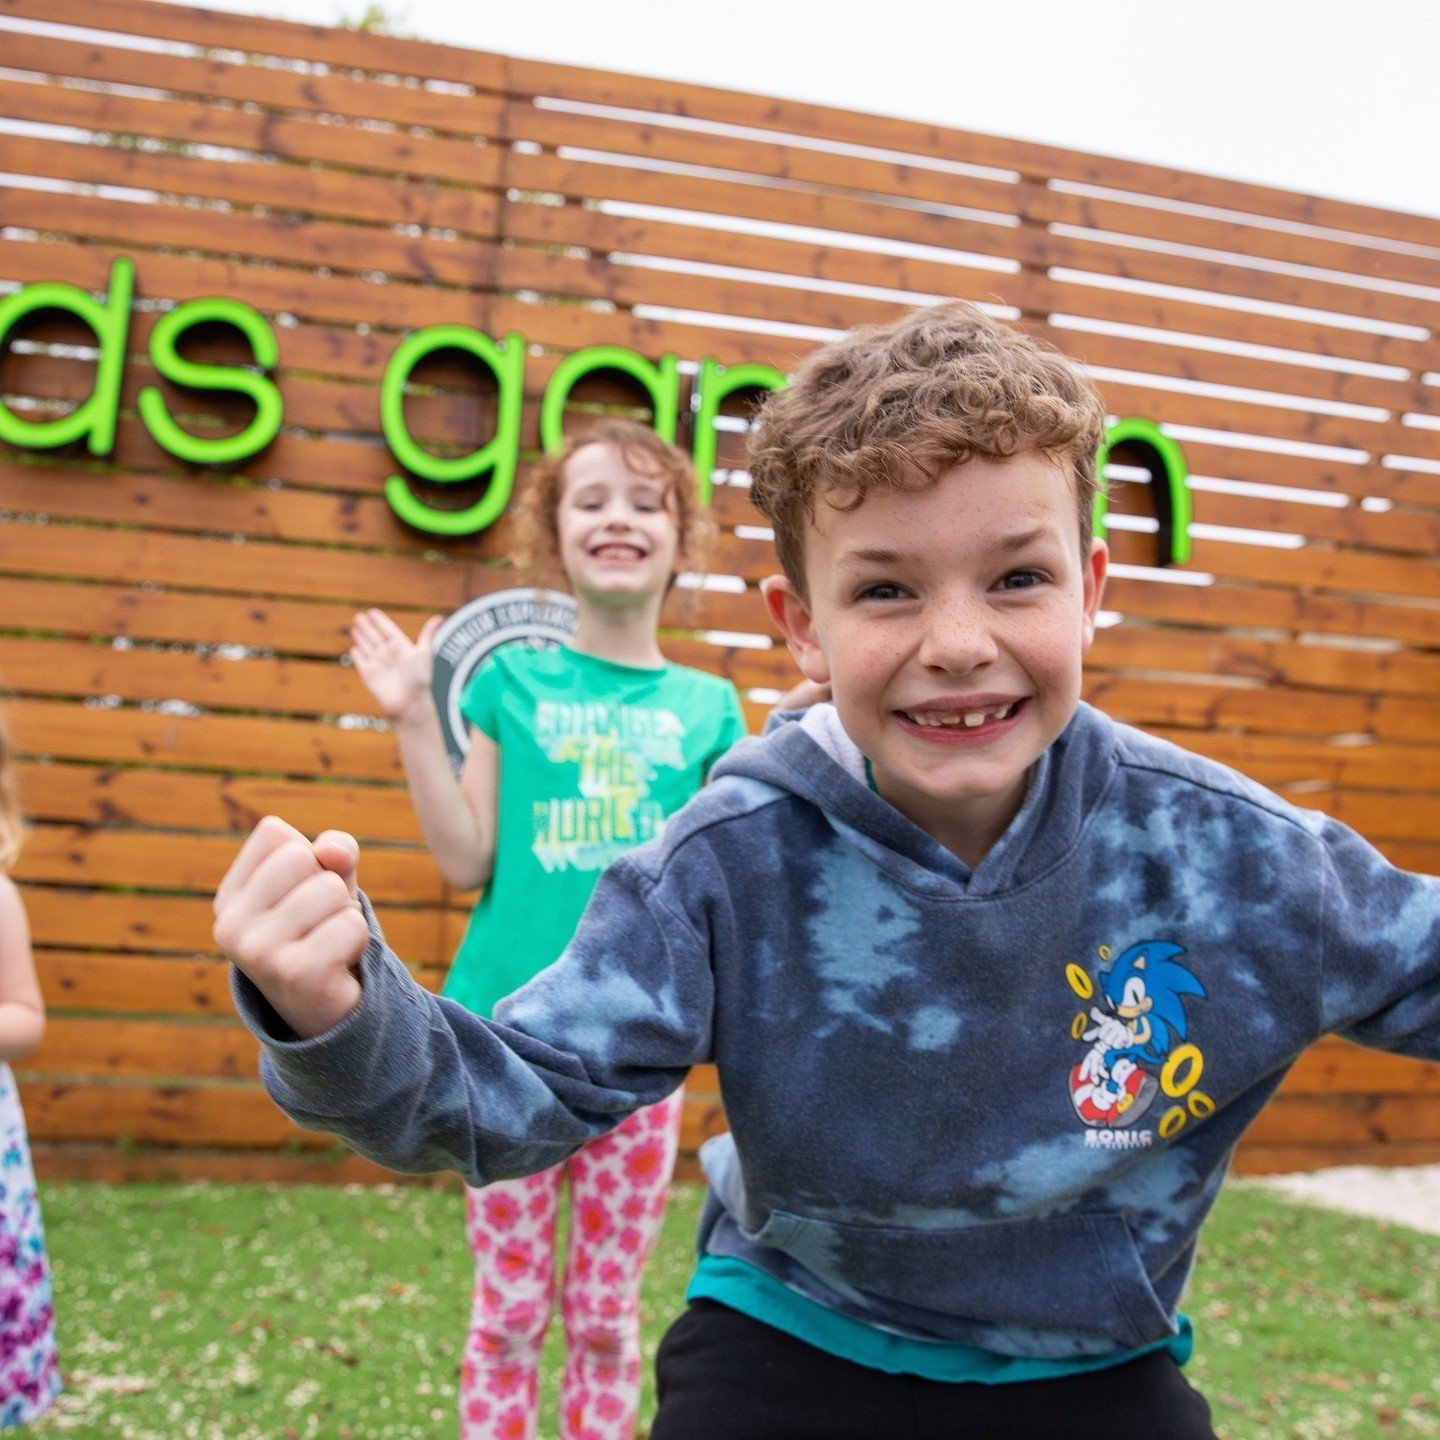 🌱🌸 Calling all nature-loving families! Come join the fun at Kids Garden during the #SWCSpringStroll April 27 from 11-3! 🎉 Explore the center with hourly tours, dive into nature arts and crafts, and get your hands dirty at our gardening station! 🎨